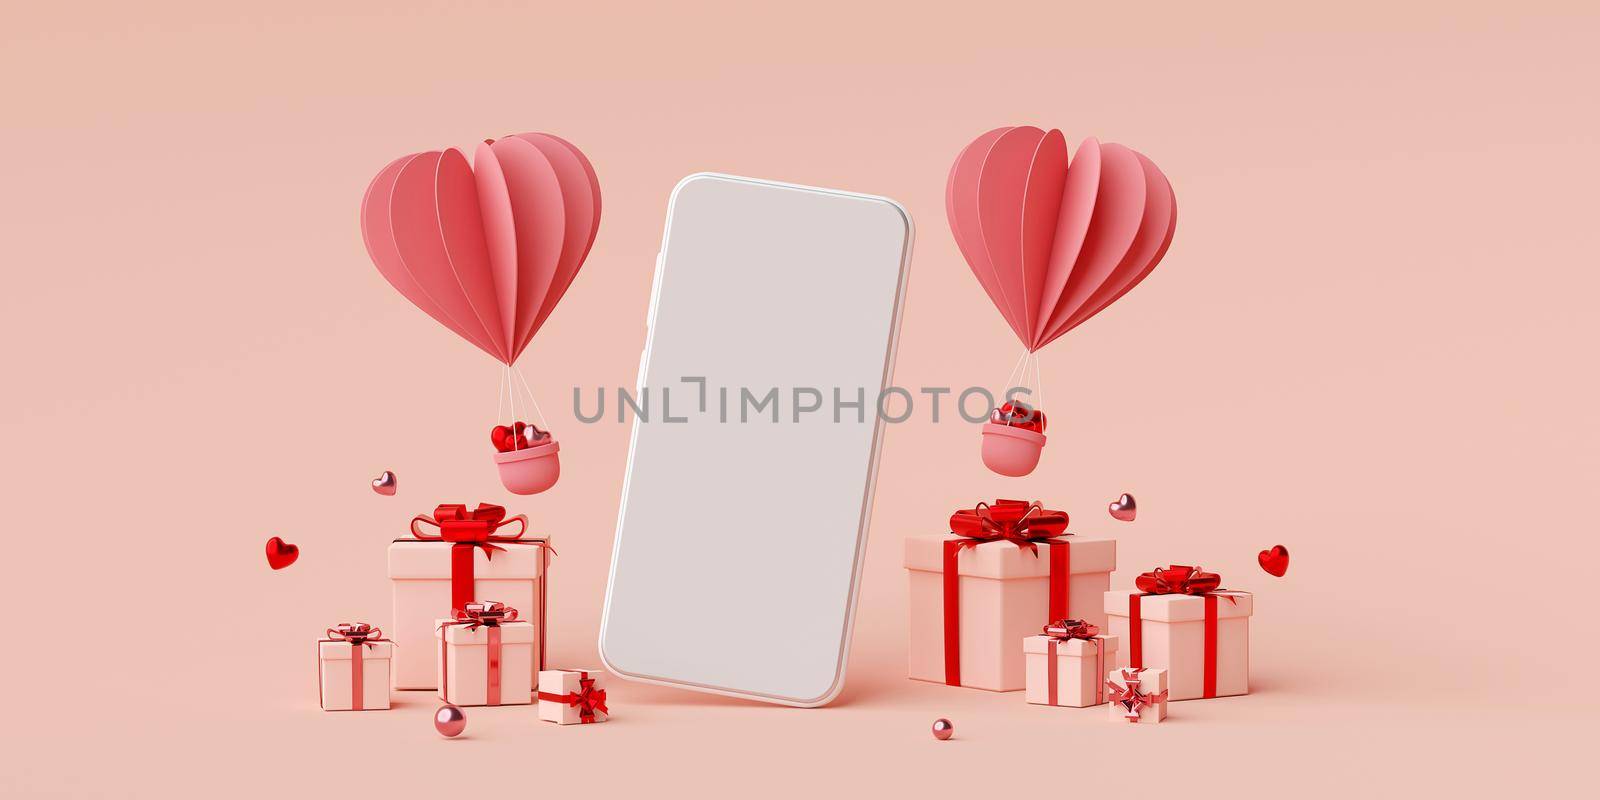 Valentine banner background of smartphone with gift box and heart shape balloon, 3d rendering by nutzchotwarut